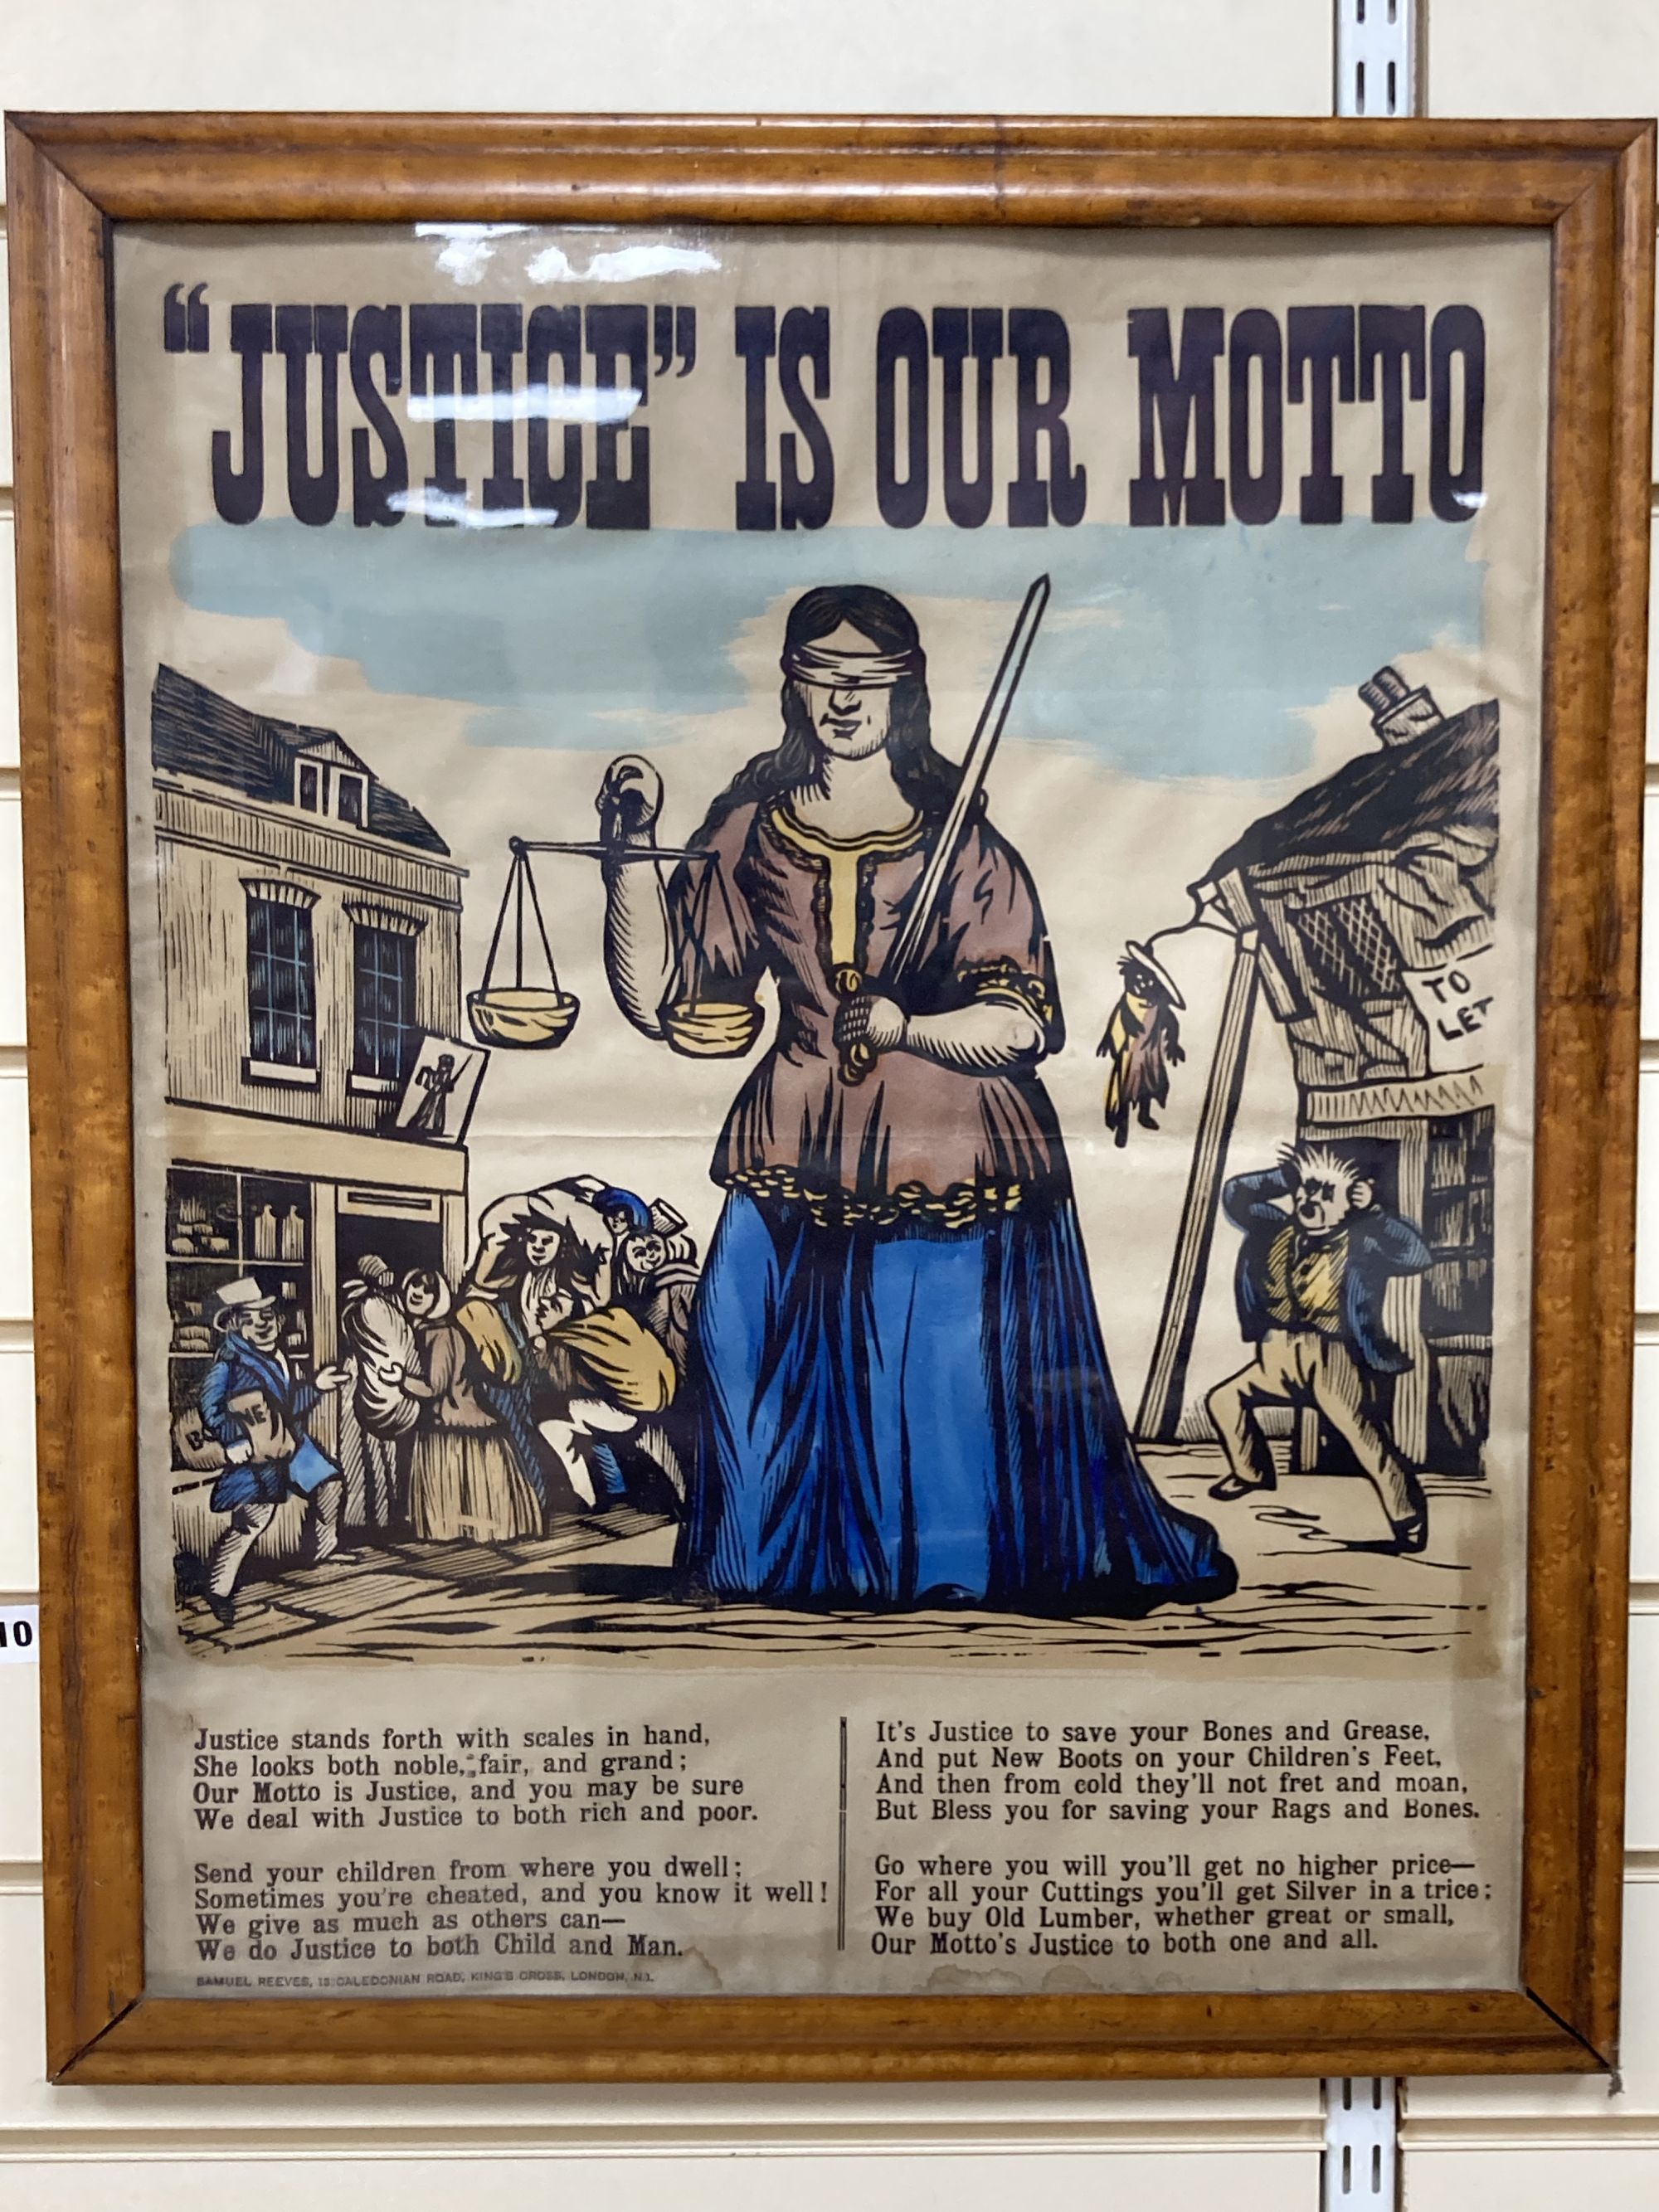 Samuel Reeves Publ., hand coloured poster, Justice is our motto, 62 x 50cm, maple framed